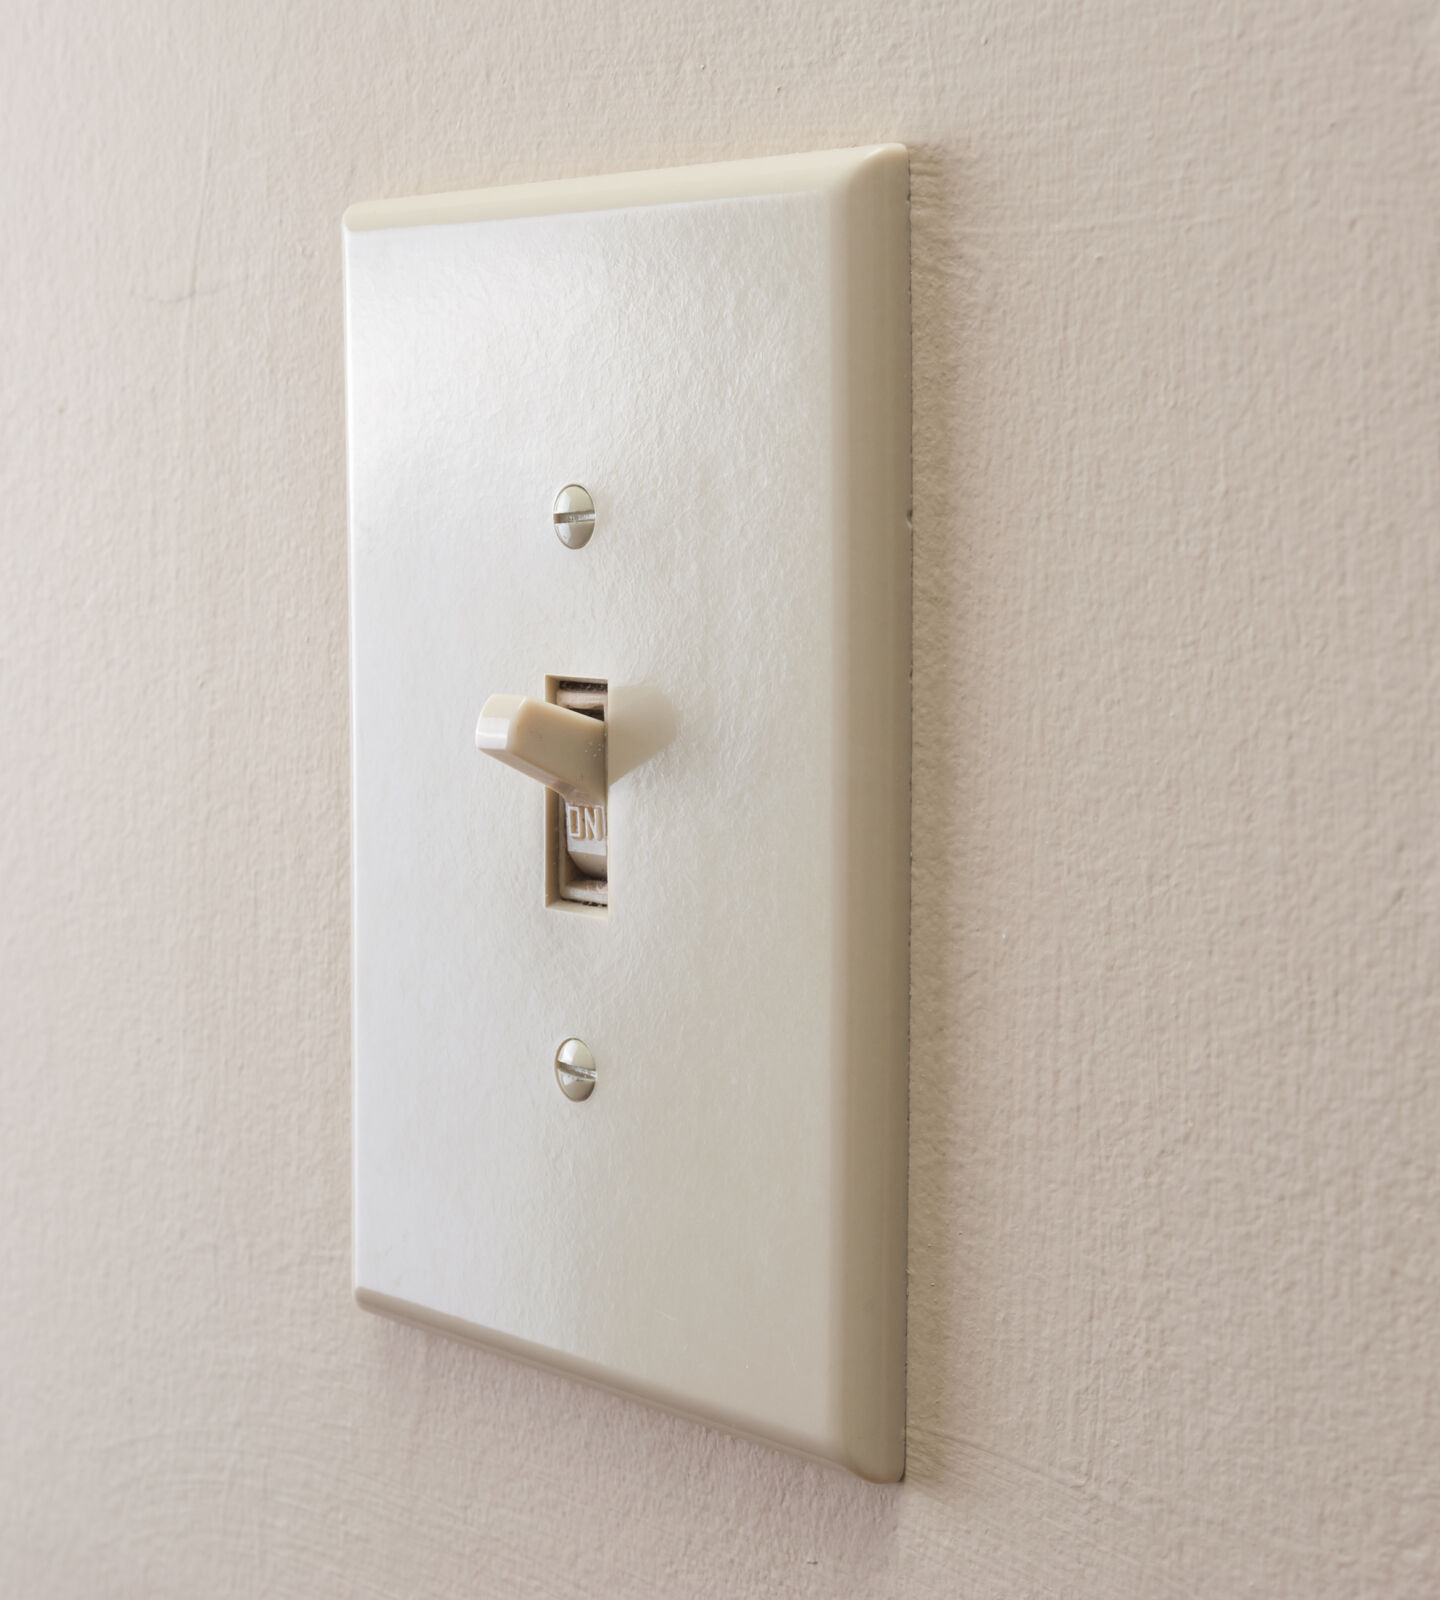 Light switch on wall turned to on position.